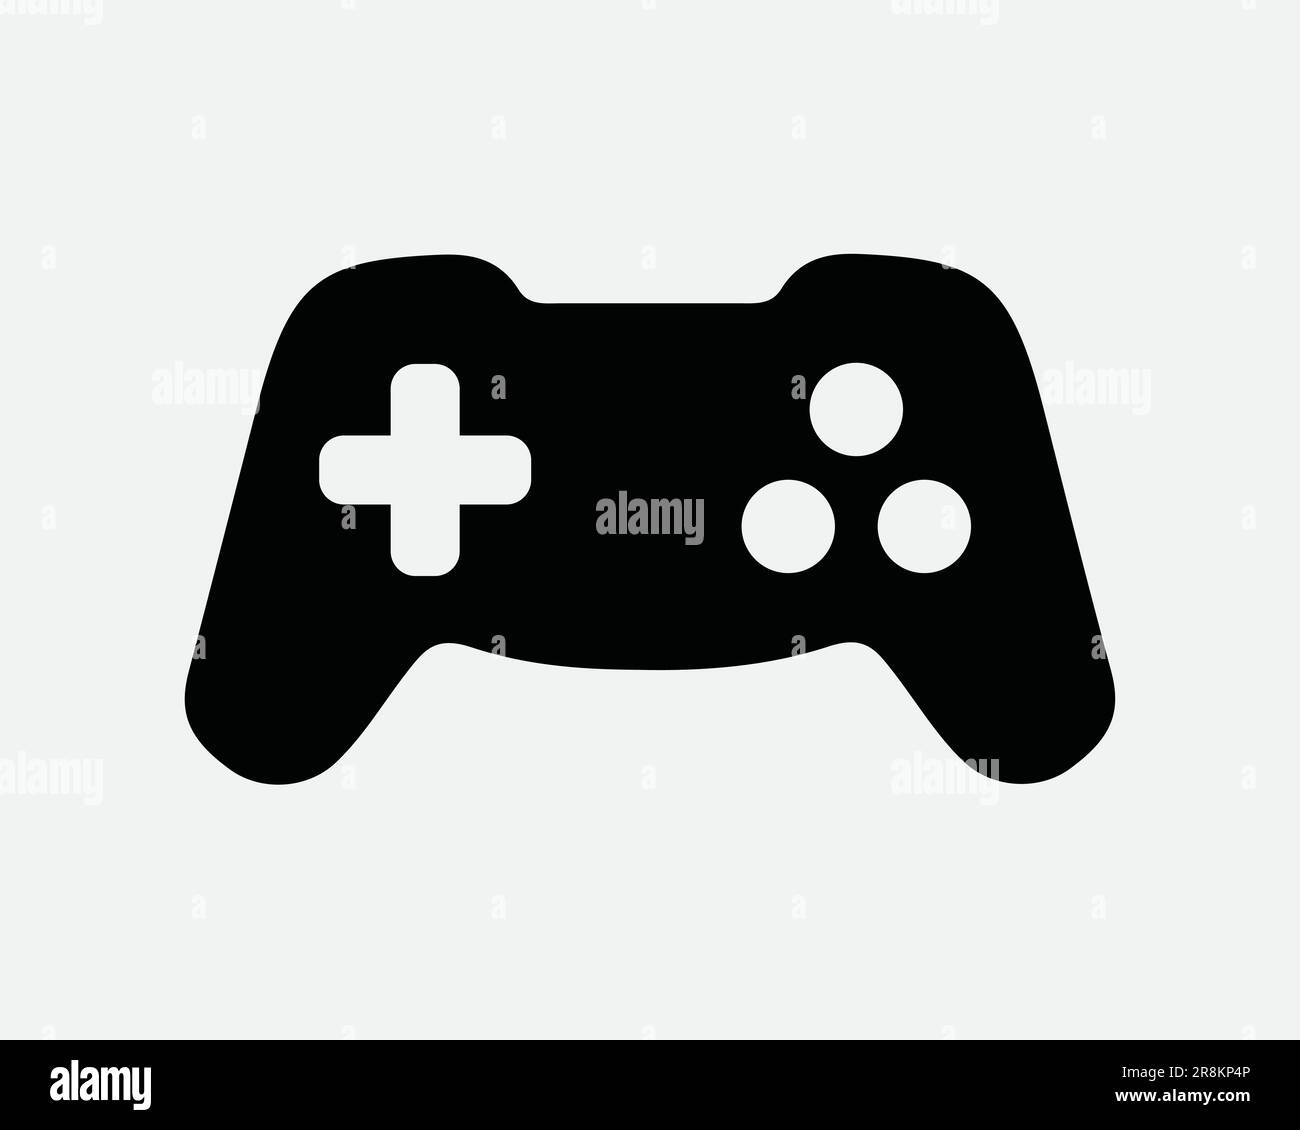 Video Game Controller Icon. Wireless Gaming Console Control Joystick Arcade. Black White Sign Symbol Illustration Artwork Graphic Clipart EPS Vector Stock Vector